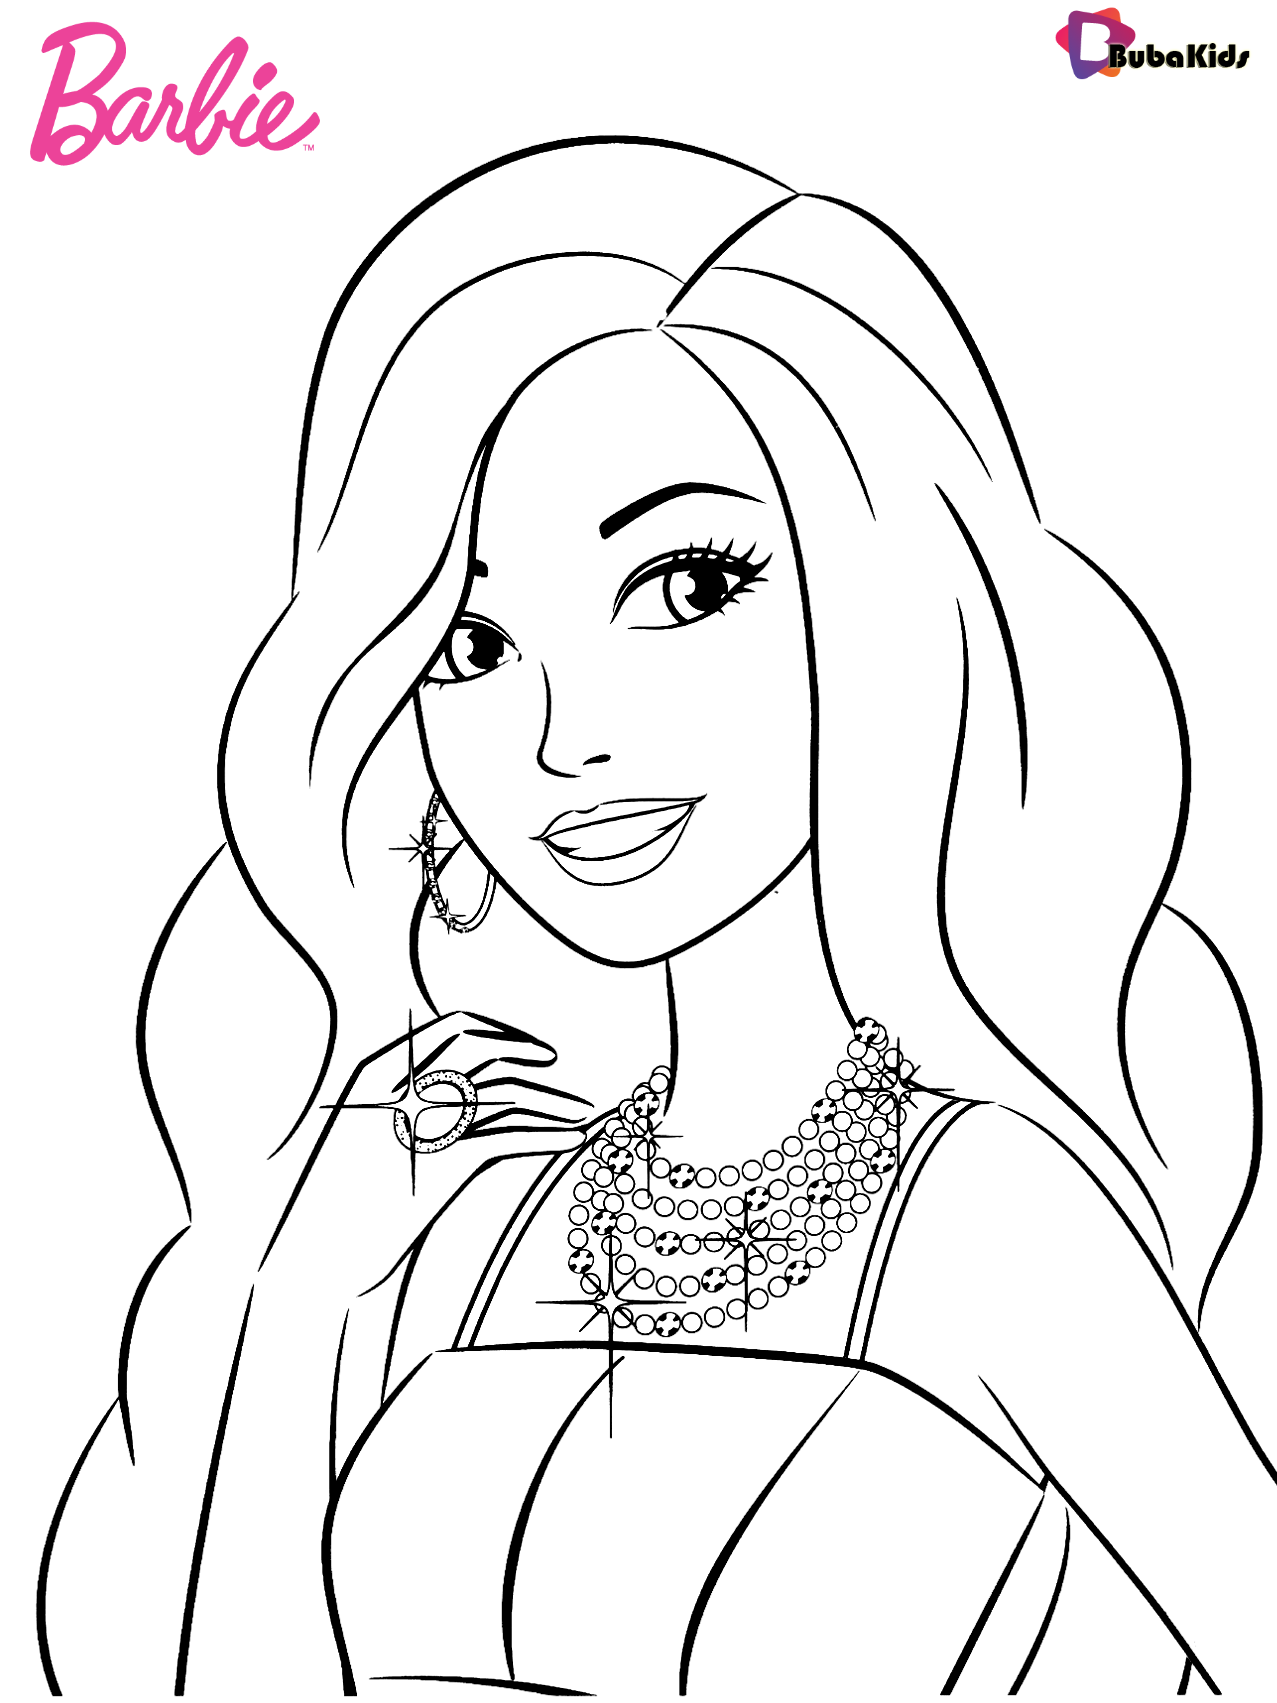 Incredible Barbie coloring page to print and color for free Wallpaper